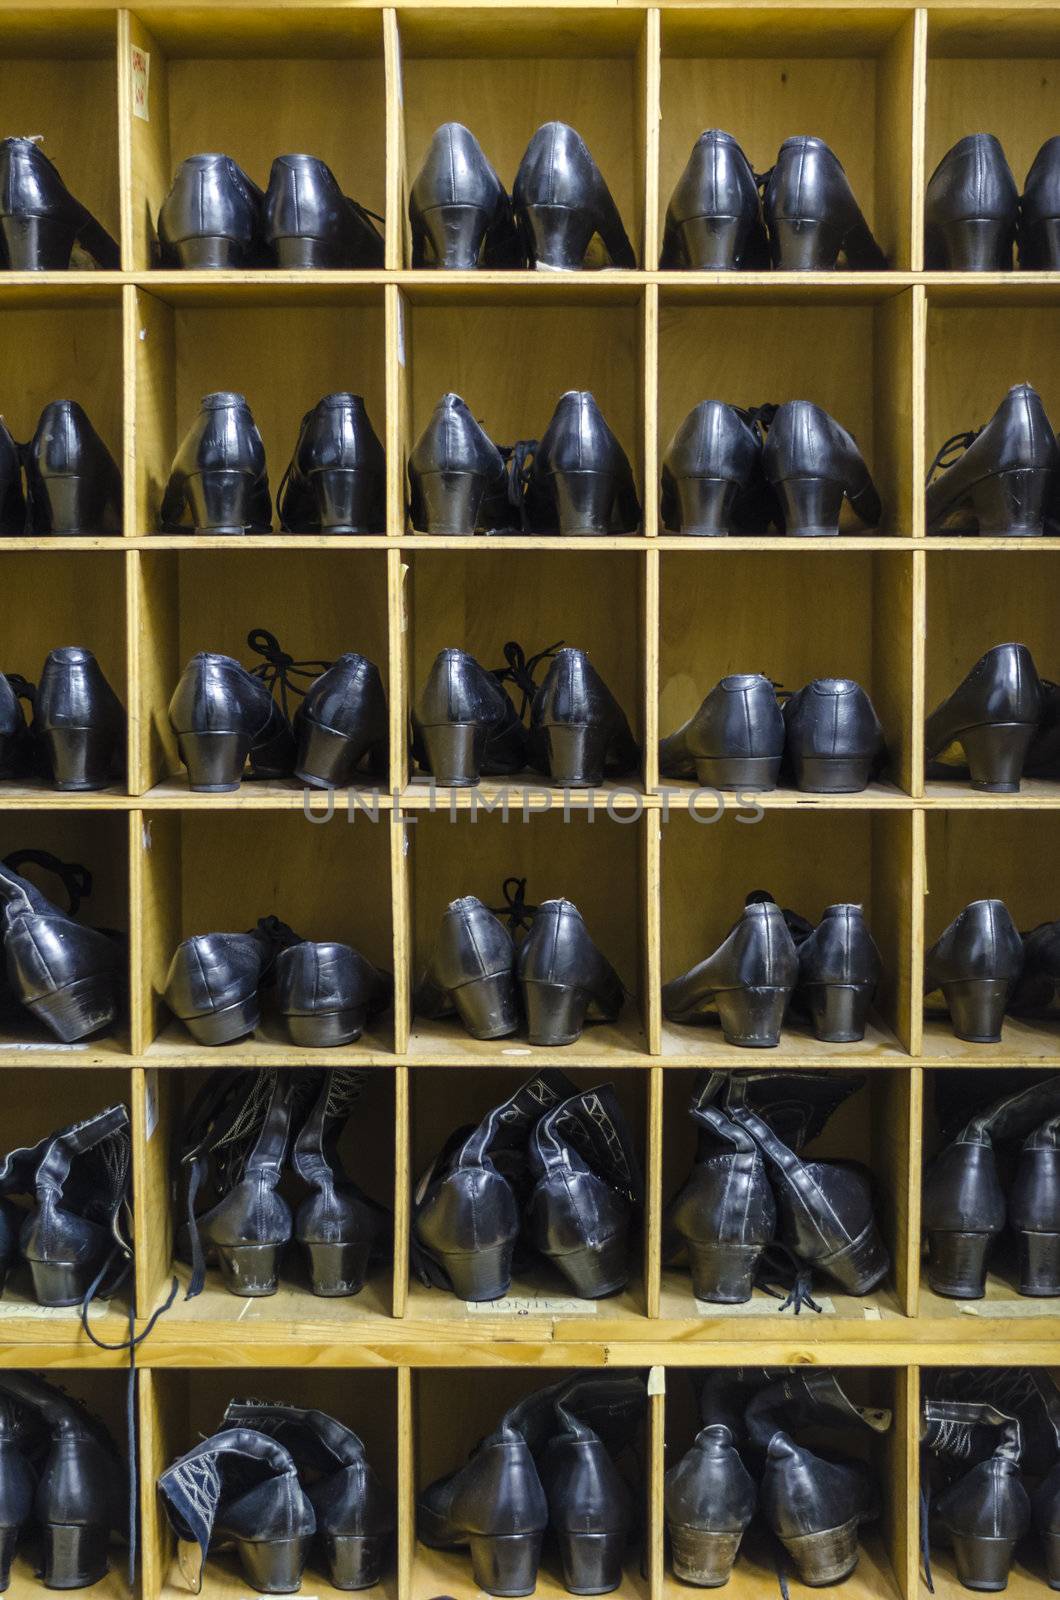 Old folkloristic dancing boots organised in trays.